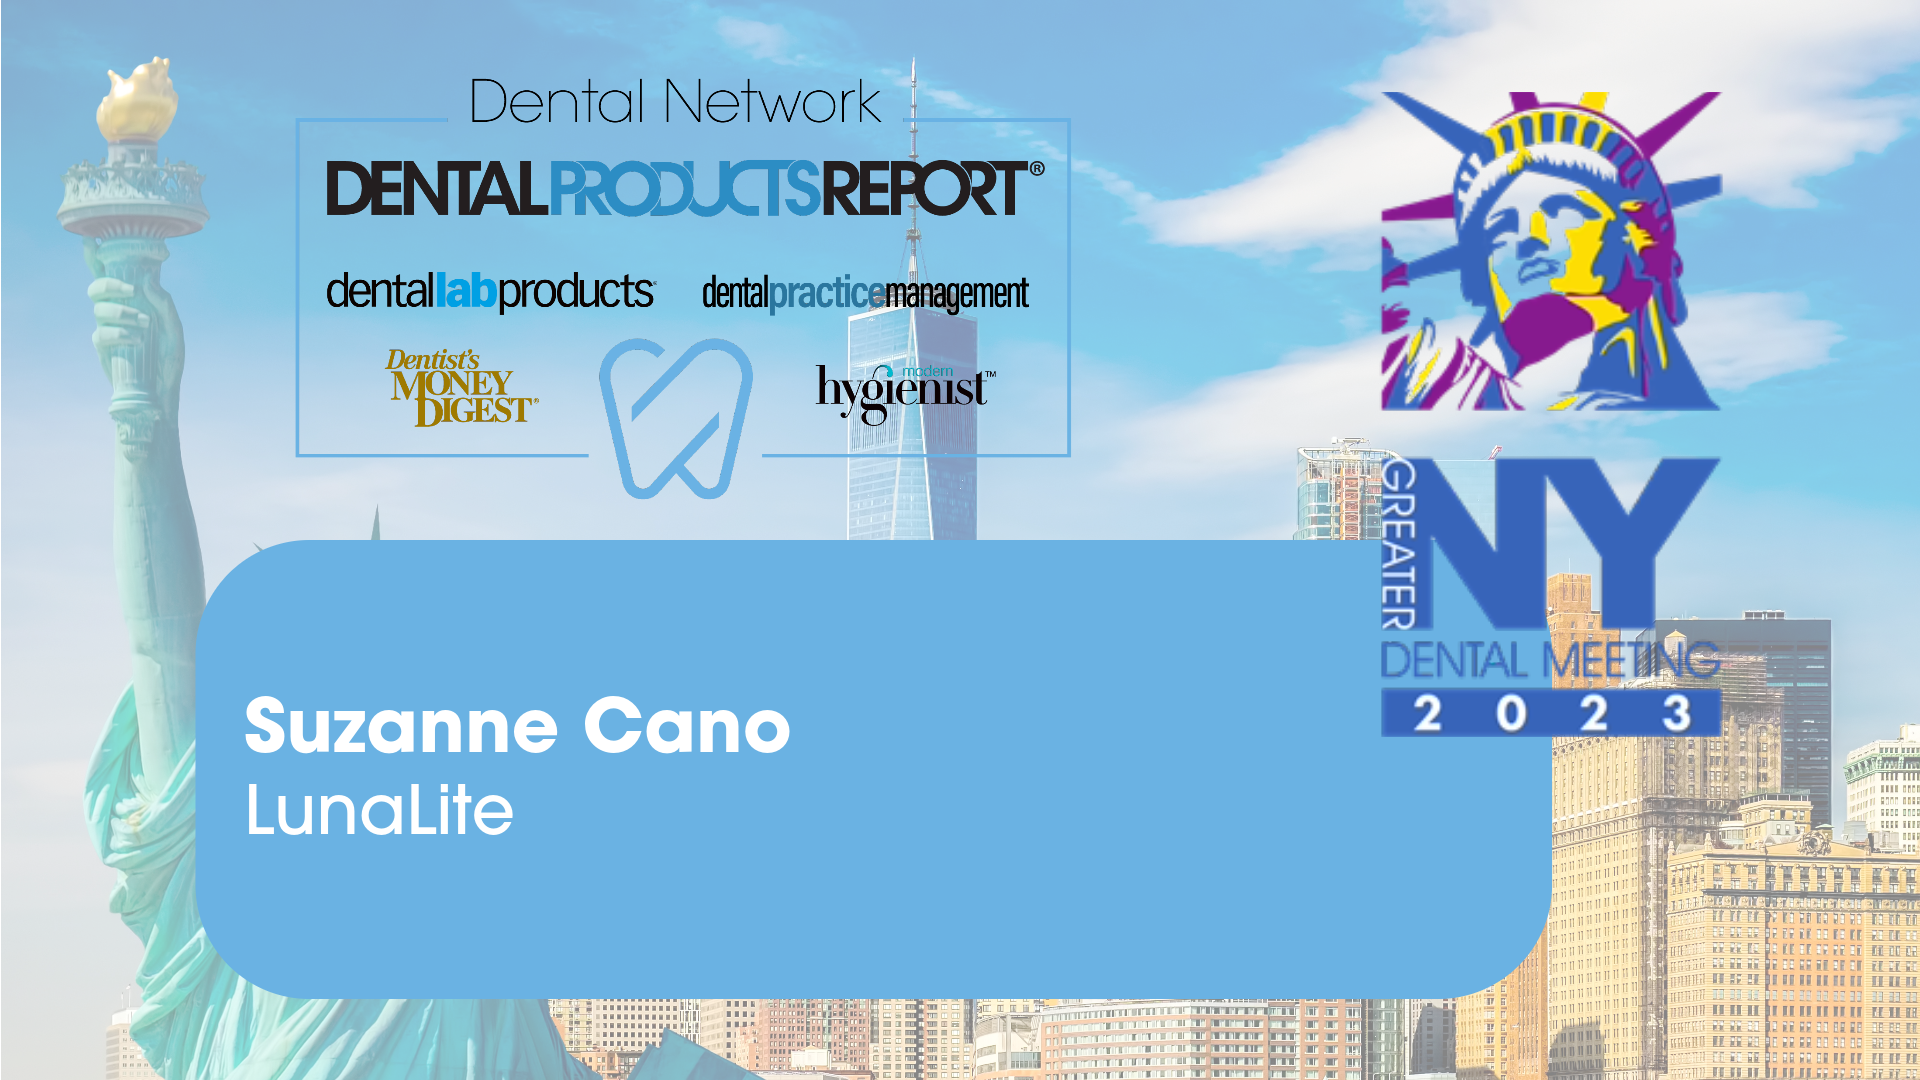 Greater New York Dental Meeting 2023 – Interview with Suzanne Cano from LunaLite Dental